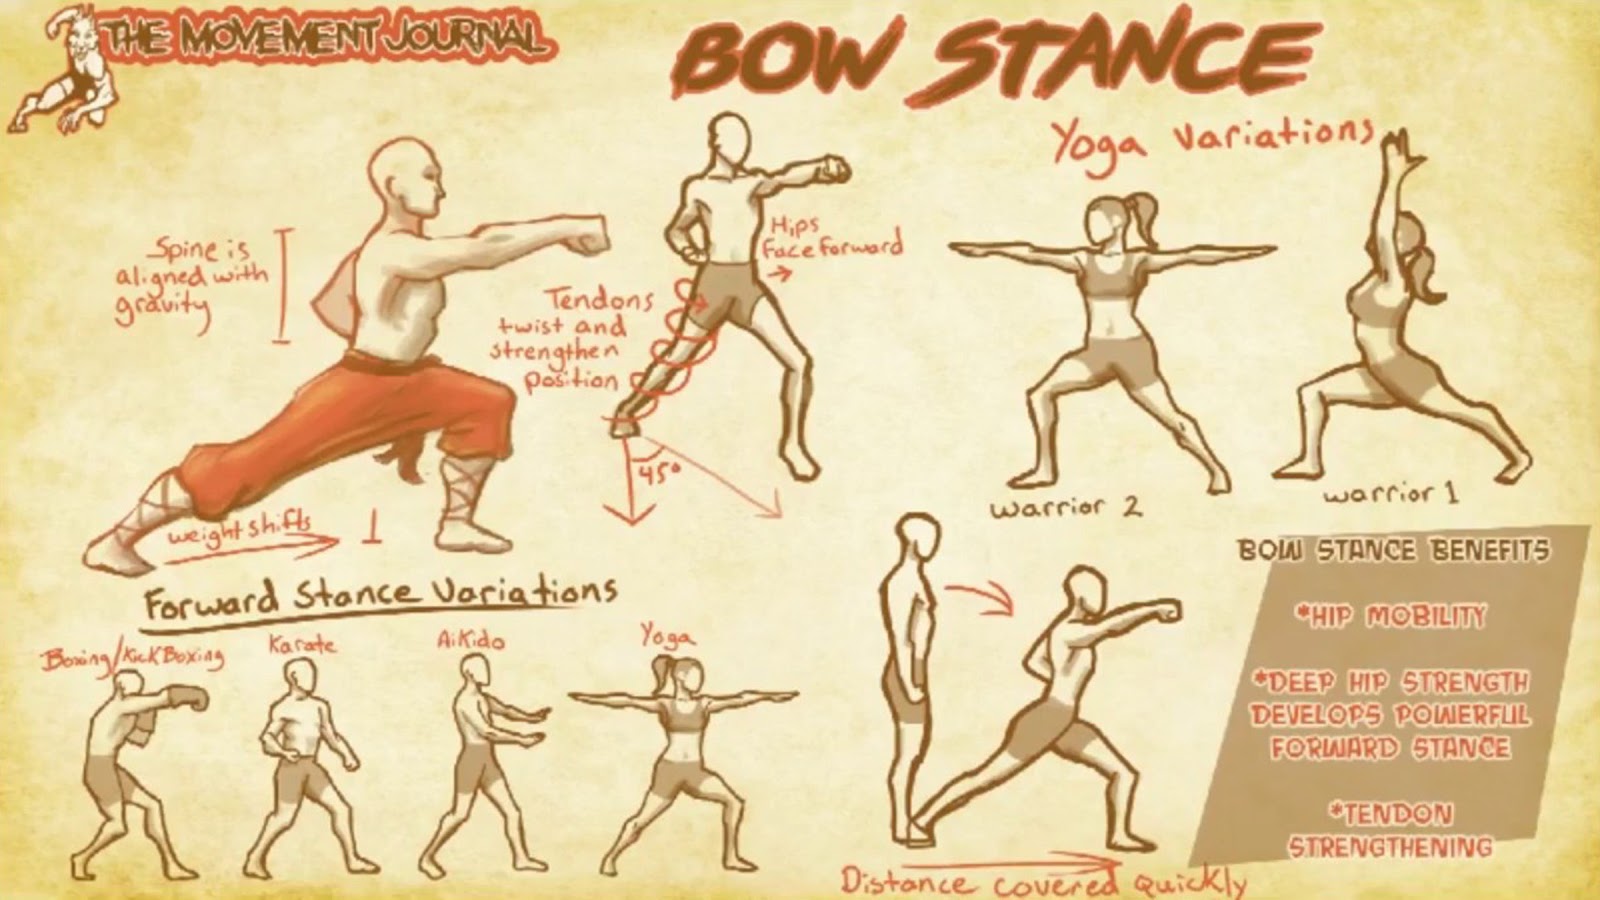 Bow stance